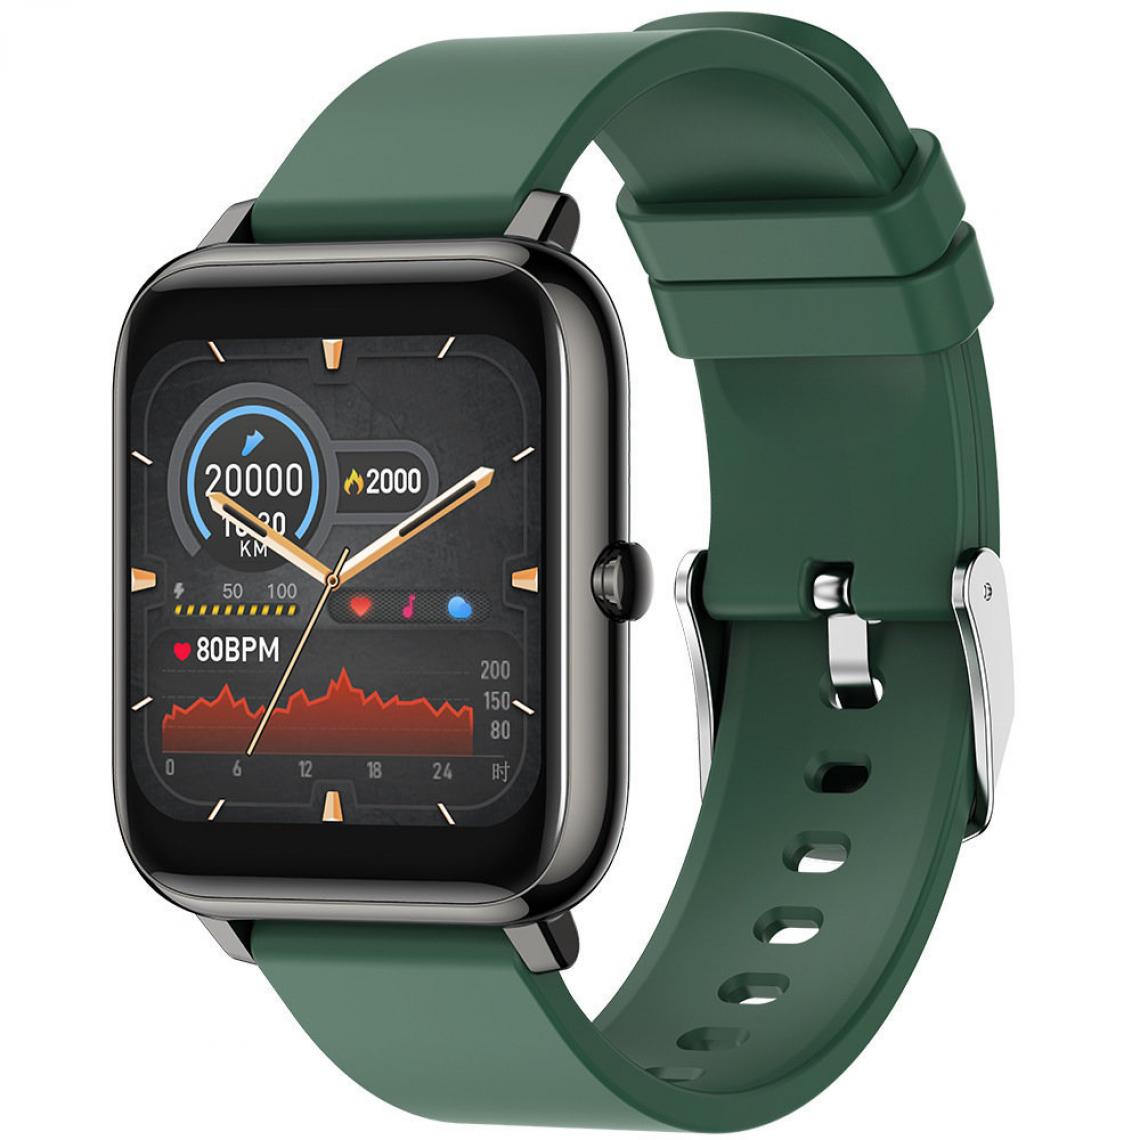 Chronotech Montres - Chronus Smart Watch, 1.4 inch Full Touch Fitness Watch with Heart Rate & Sleep Monitor, Fitness Tracker with Blood Pressure(Green) - Montre connectée